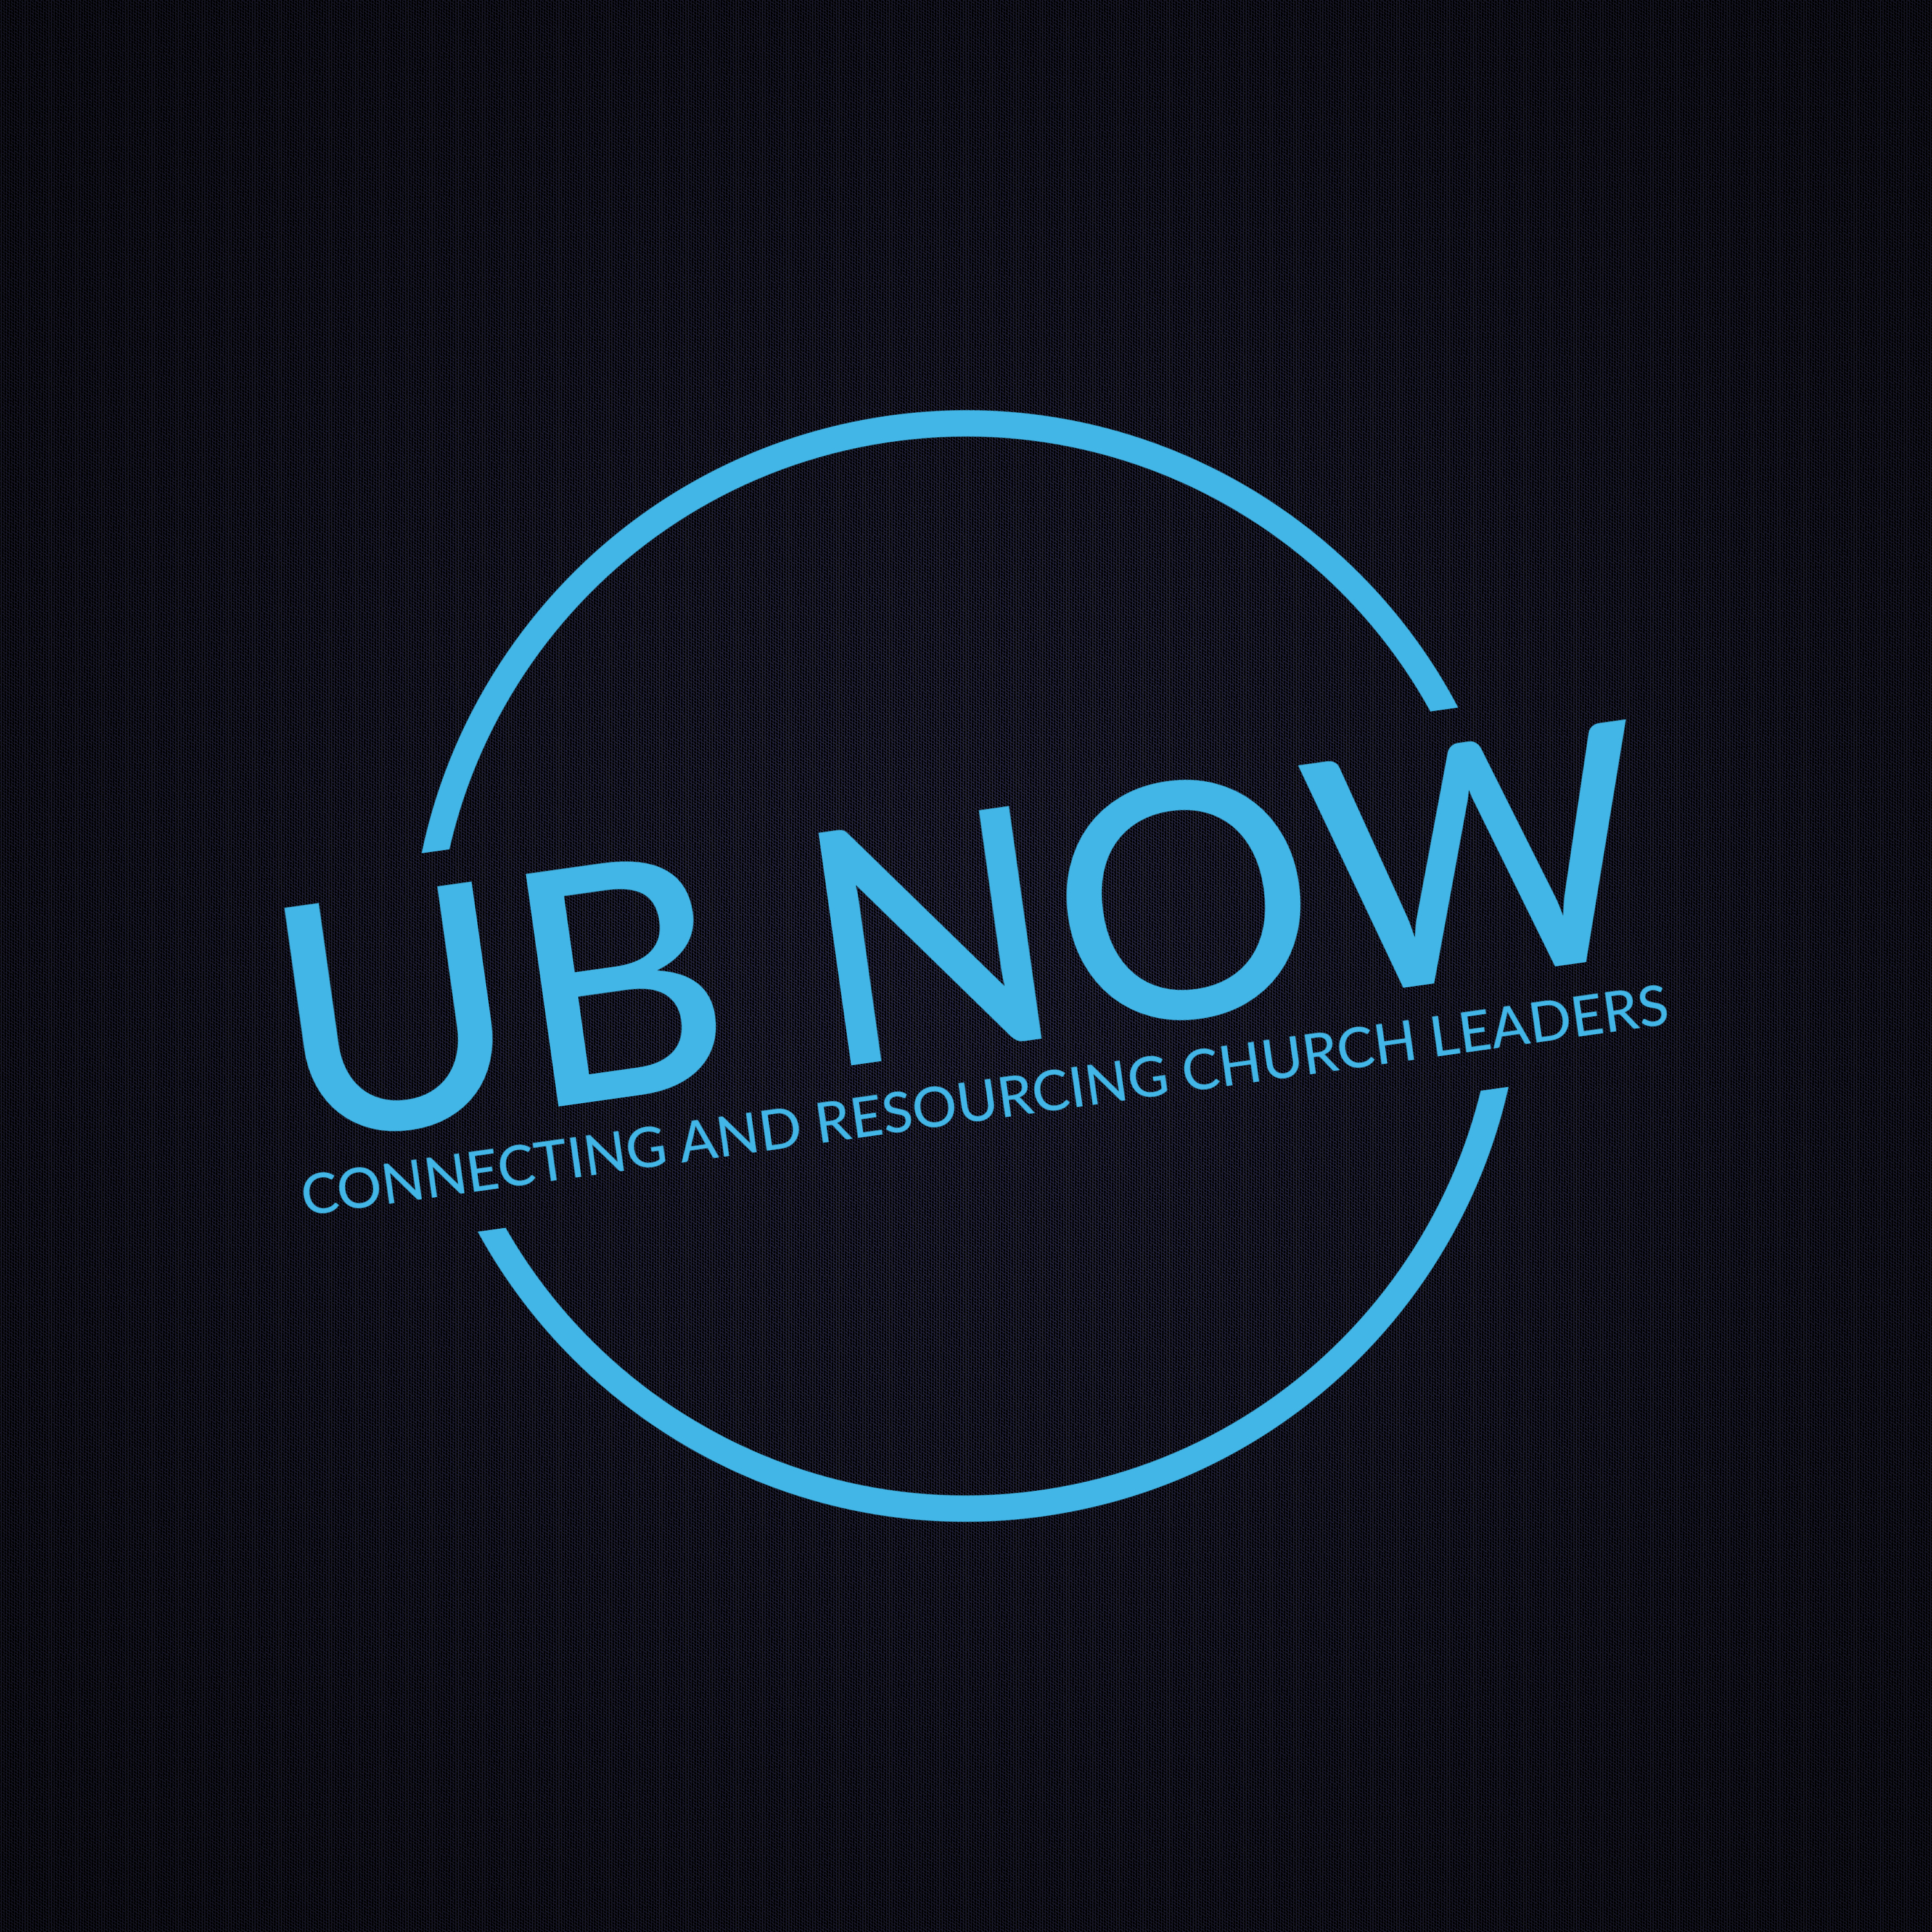 UB Now: Connecting and Resourcing Church Leaders